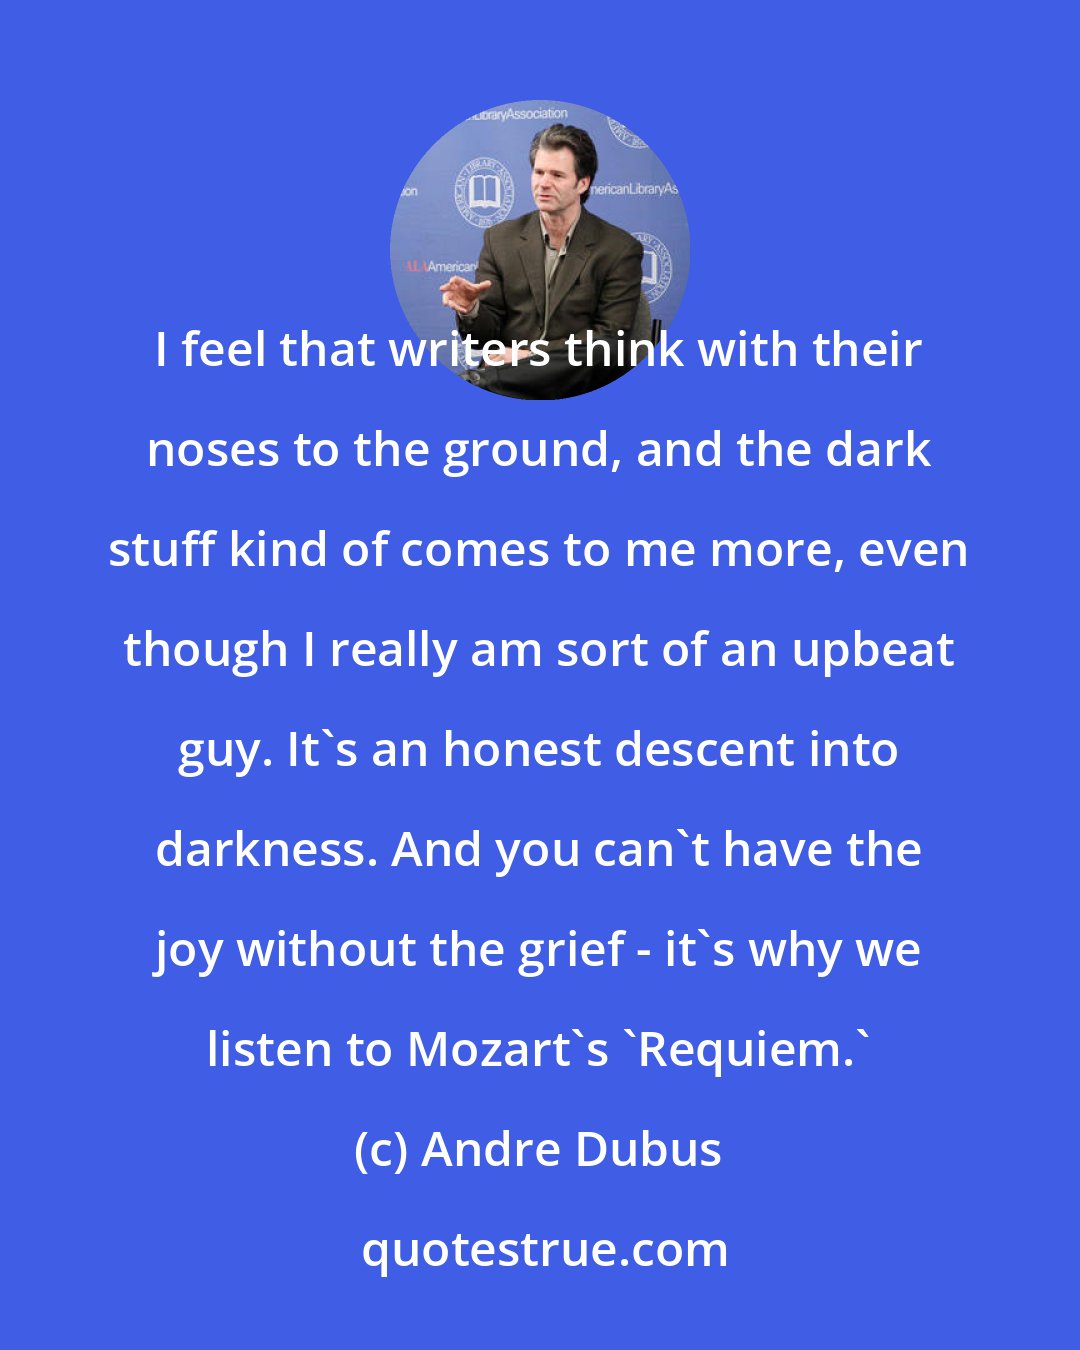 Andre Dubus: I feel that writers think with their noses to the ground, and the dark stuff kind of comes to me more, even though I really am sort of an upbeat guy. It's an honest descent into darkness. And you can't have the joy without the grief - it's why we listen to Mozart's 'Requiem.'